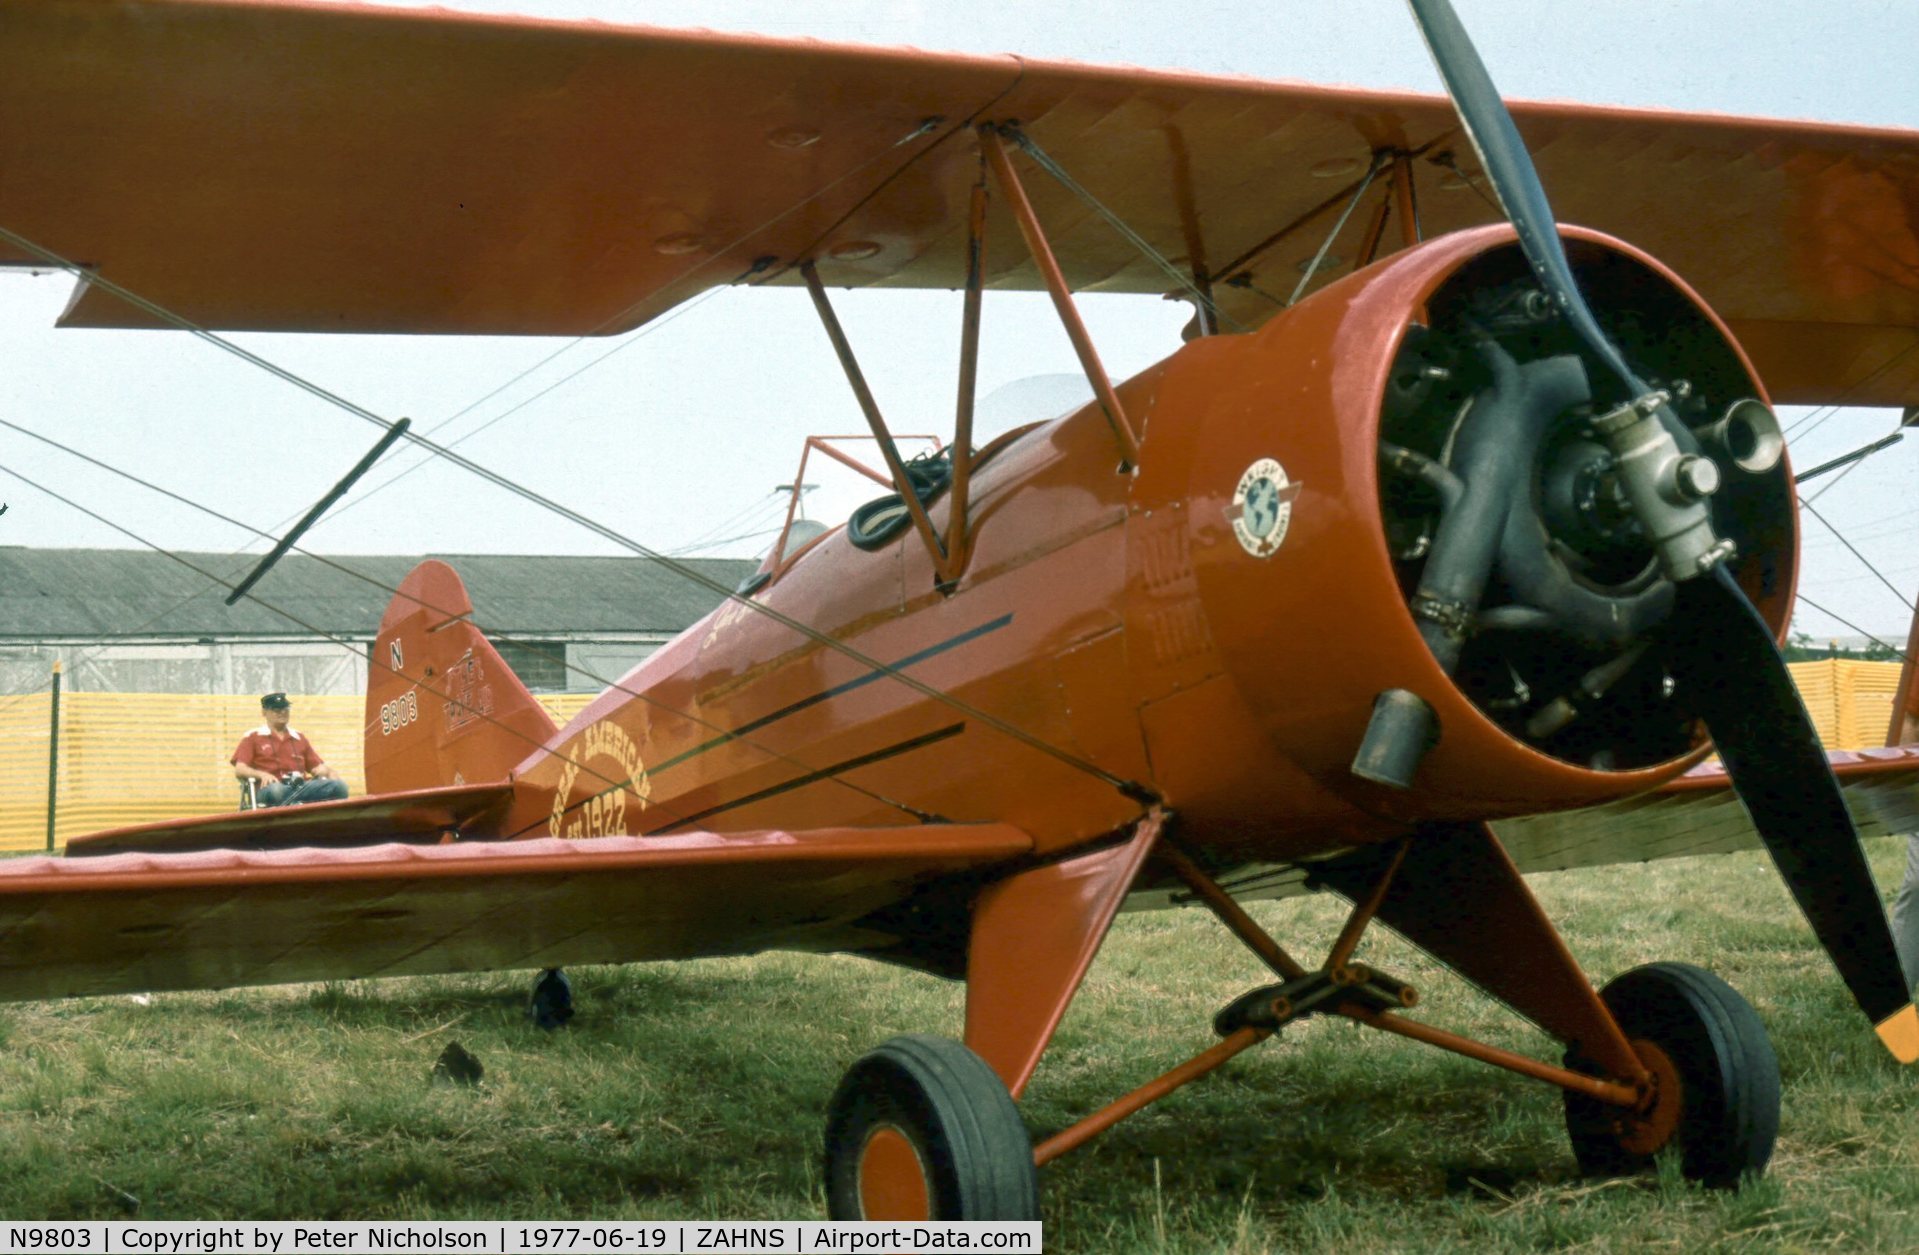 N9803, 1929 Curtiss-Wright Travel Air 4000 C/N 958, Another view of the Travel Air 4000 at the EAA Fly-in at Zahns Airport, Amityville, Long Island in the Summer of 1977. The airport closed in 1980.